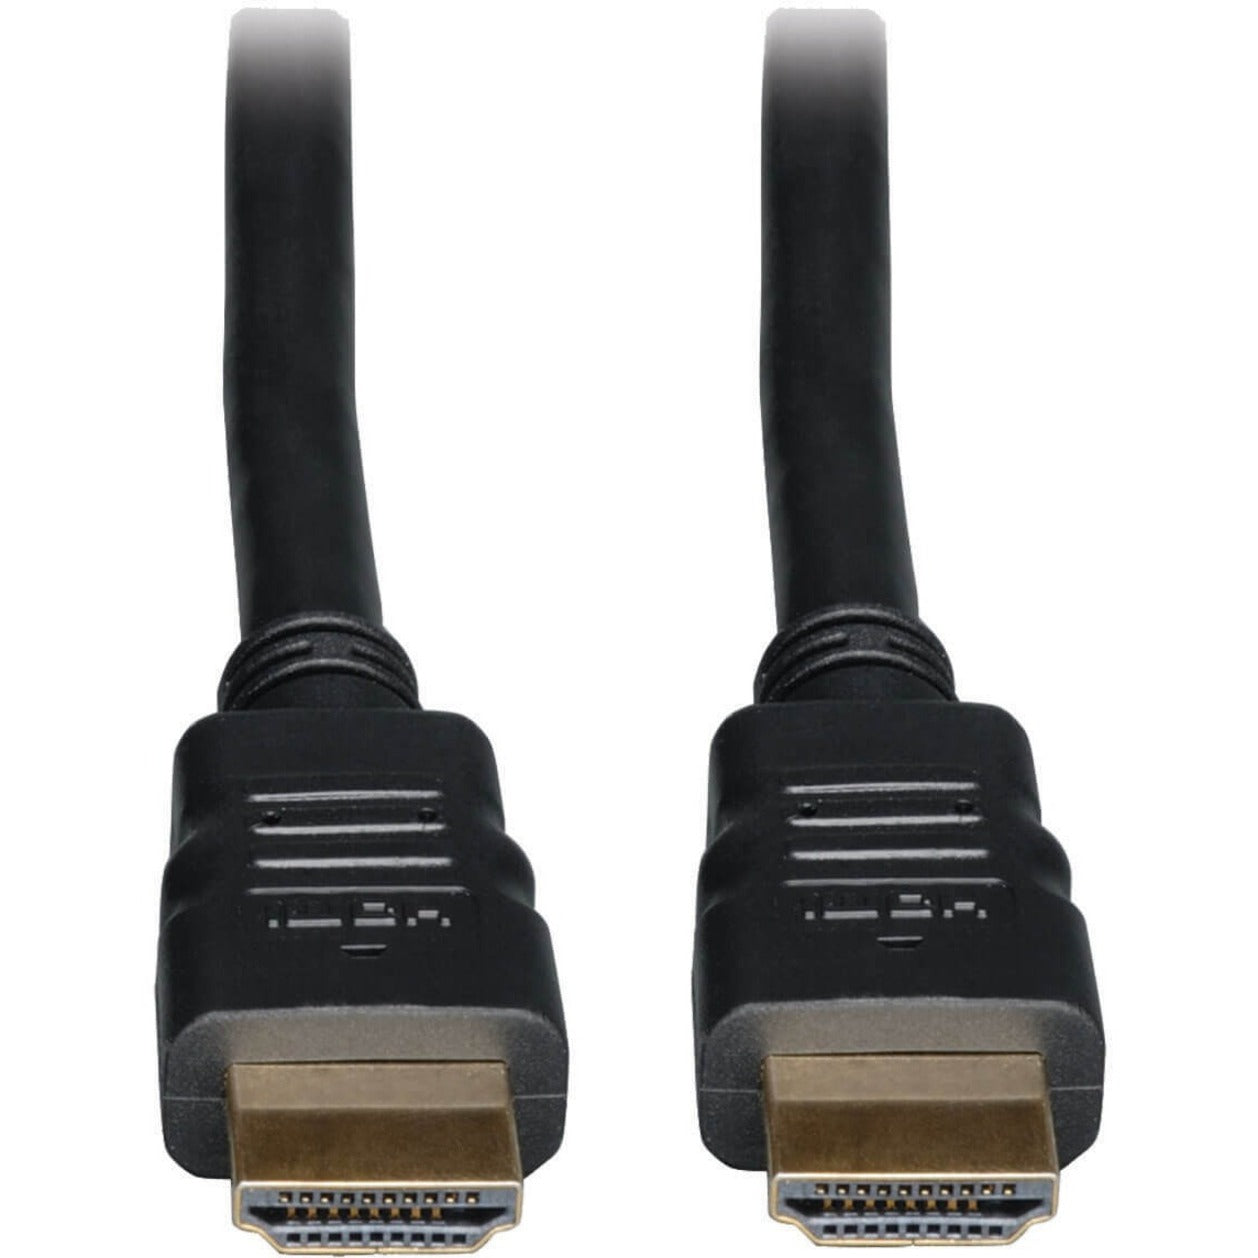 Tripp Lite P569-016-CL2 HDMI Audio/Video Cable with Ethernet, 16 ft, Gold-Plated Connectors, 18 Gbit/s Data Transfer Rate